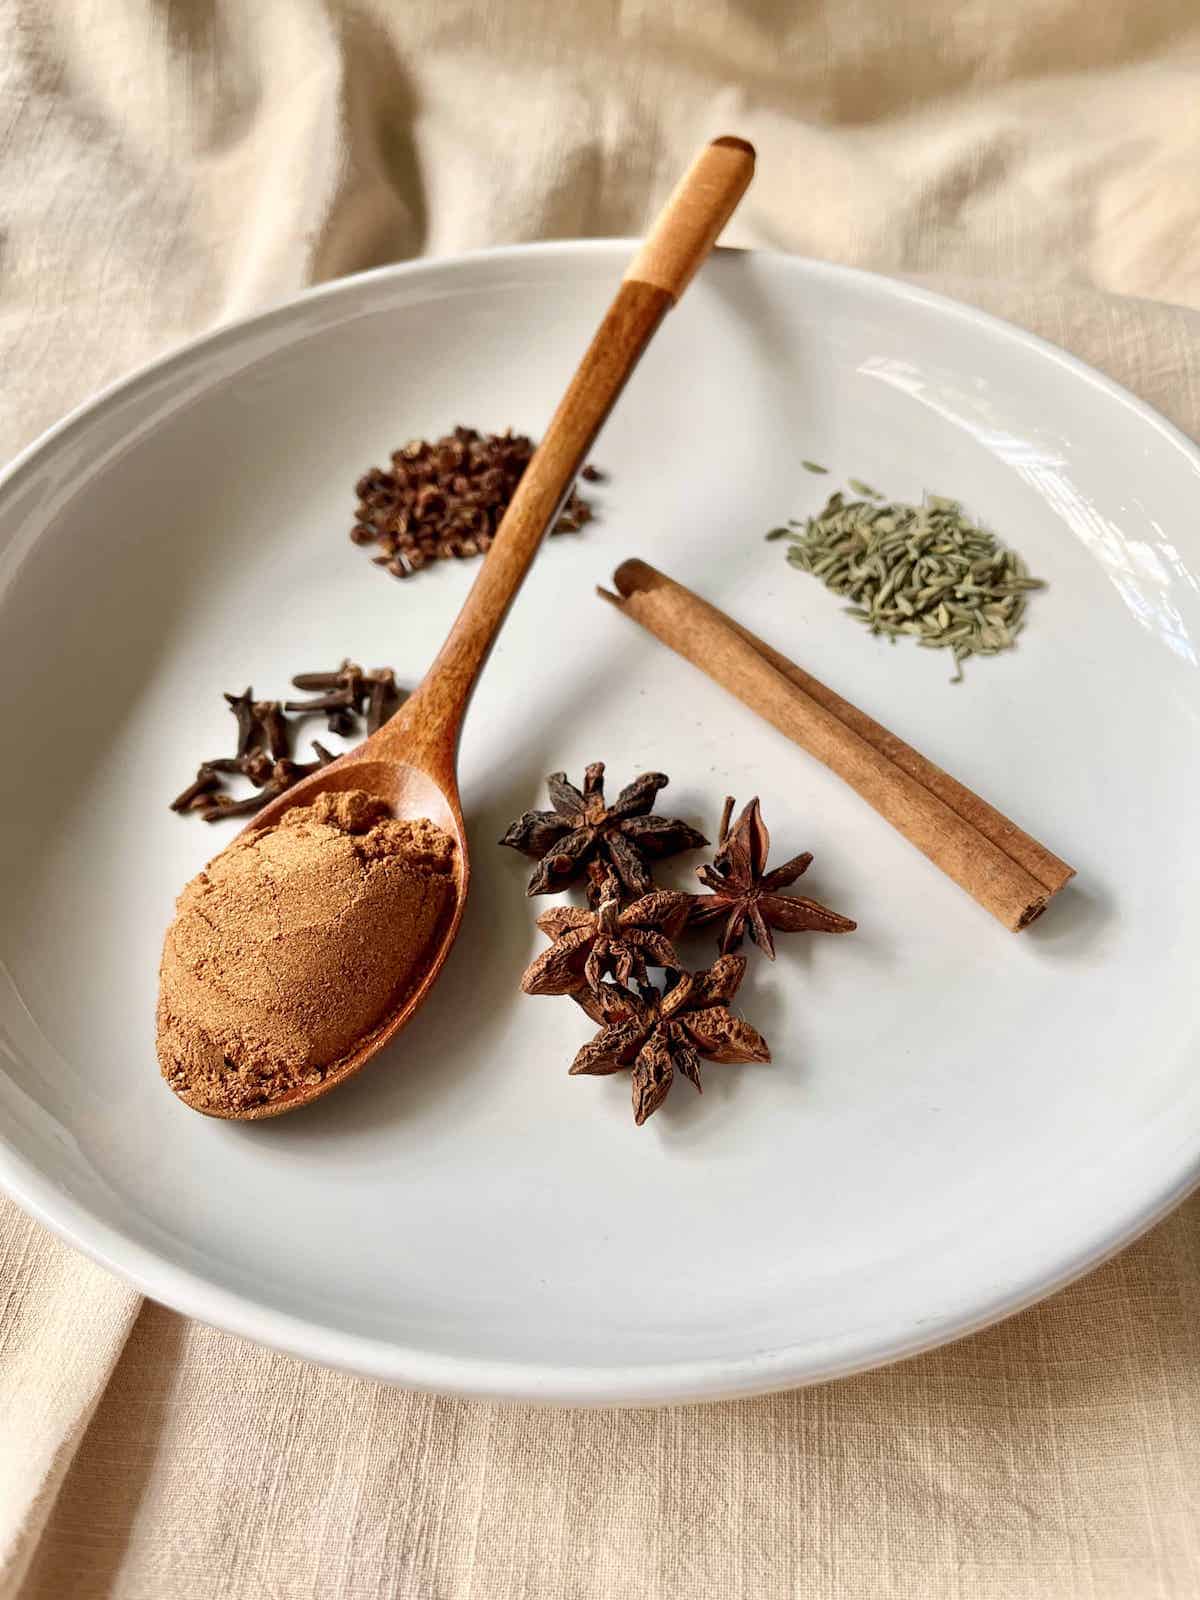 A plate of spices used to make Chinese 5 spice powder